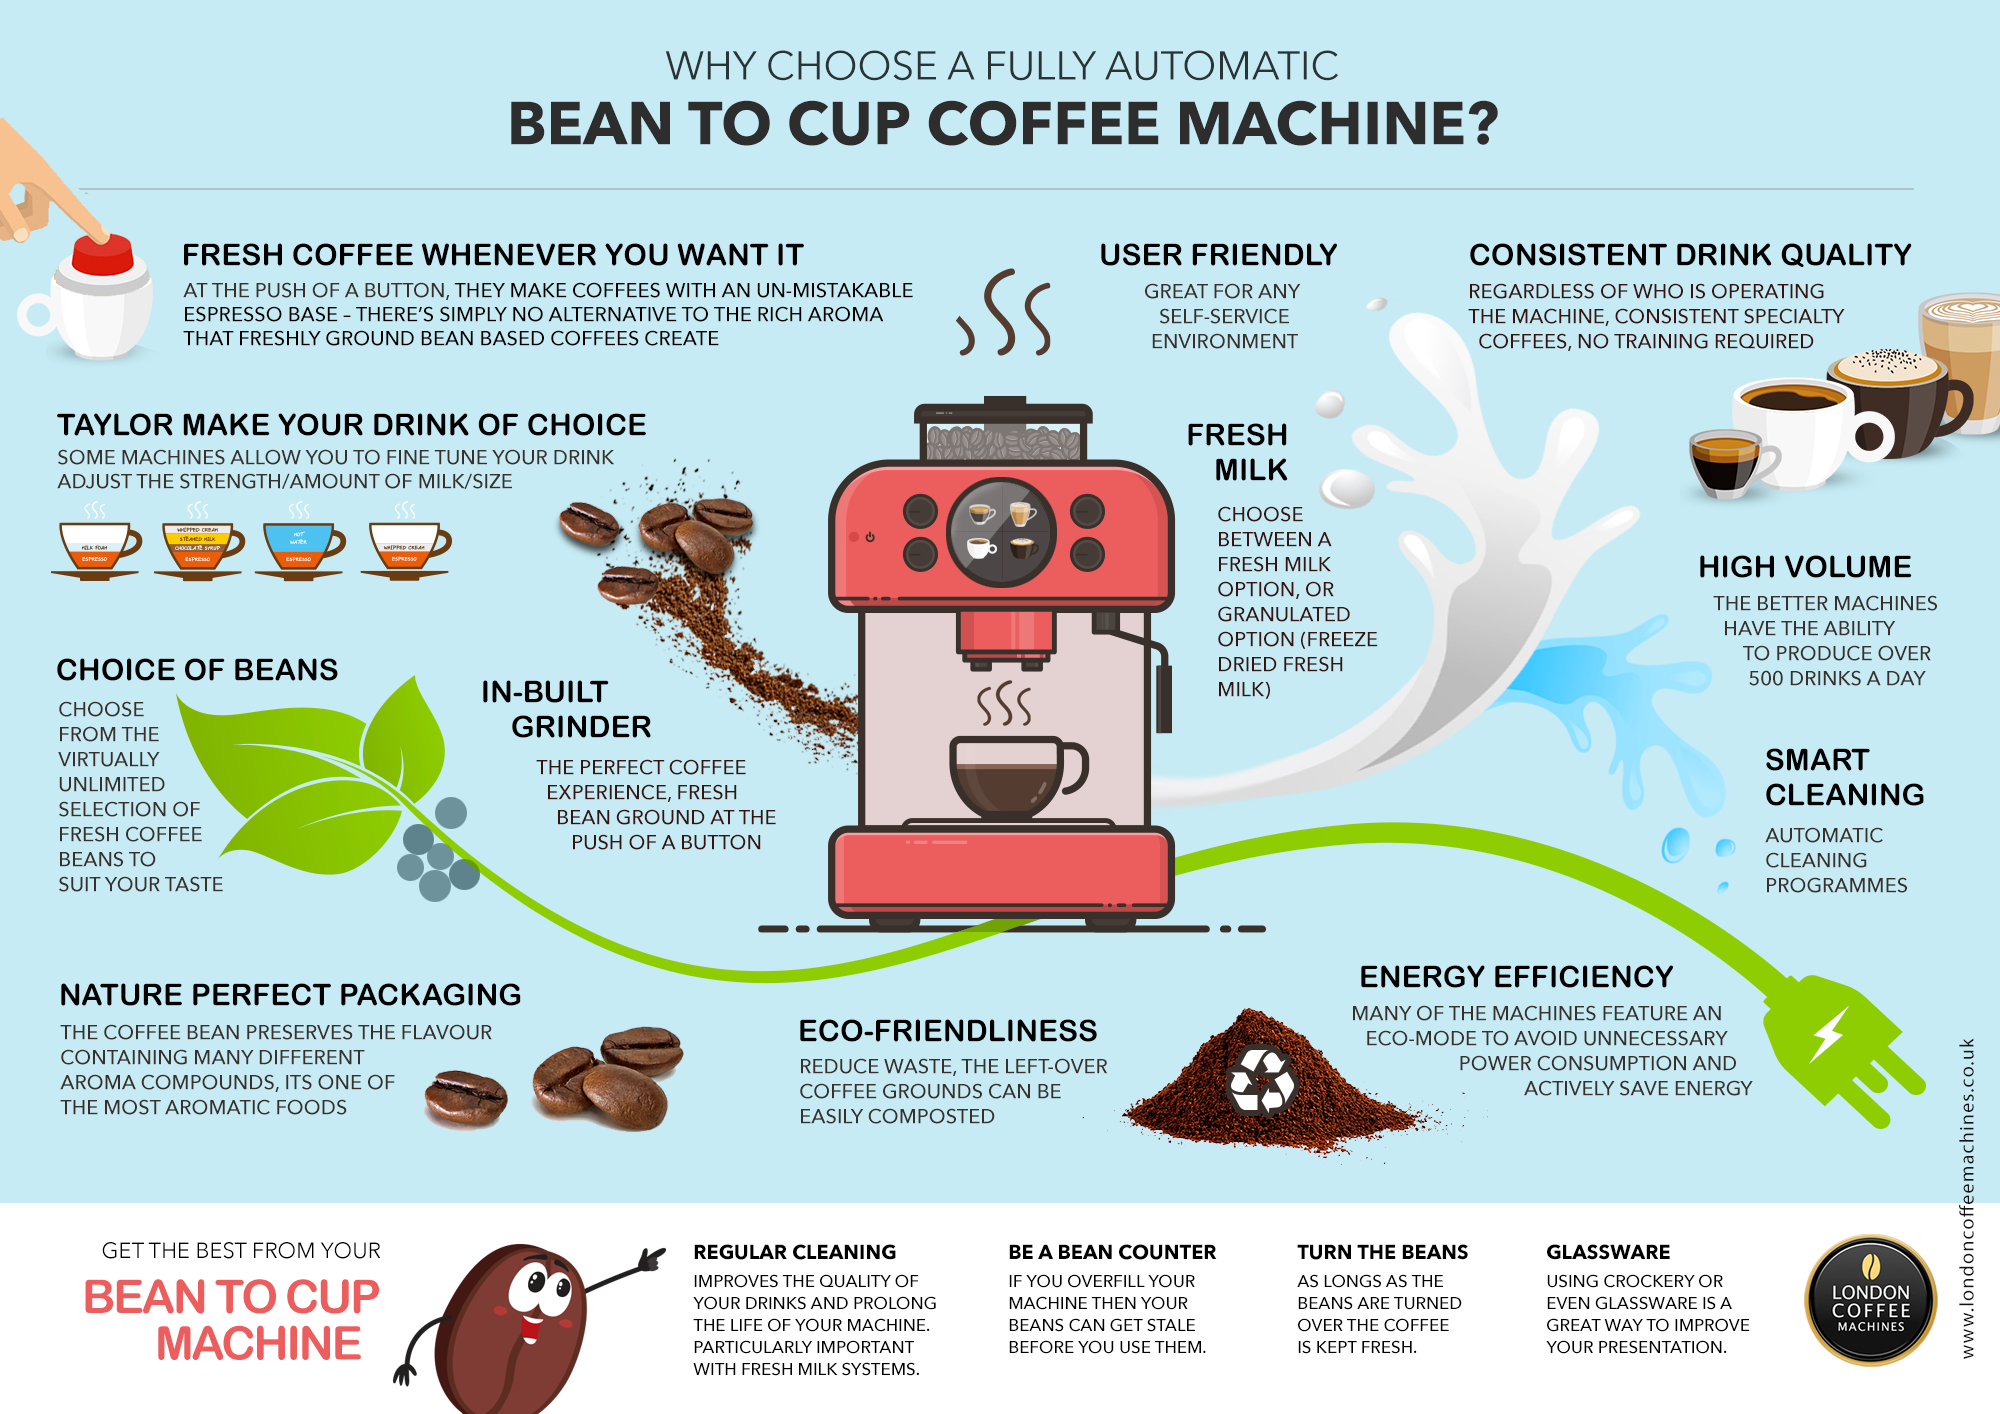 Why Choose a Fully Automatic Bean to Cup Coffee Machine?